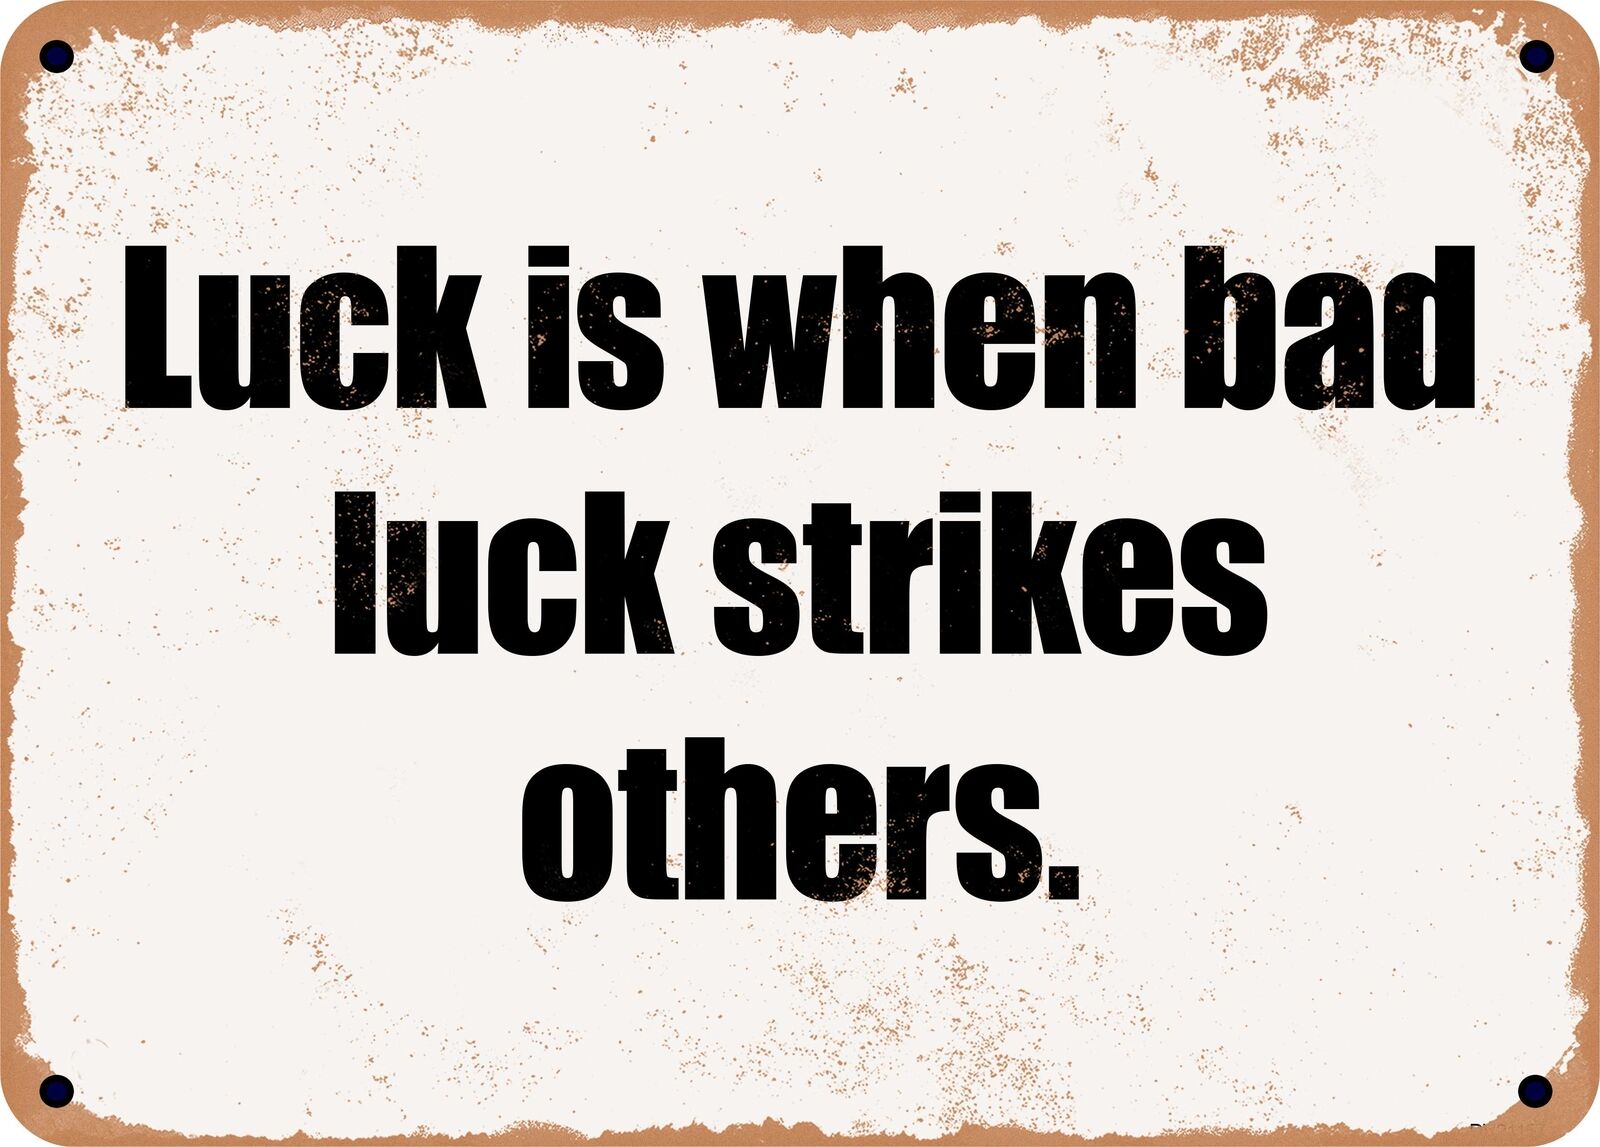 METAL SIGN - Luck is when bad luck strikes others.